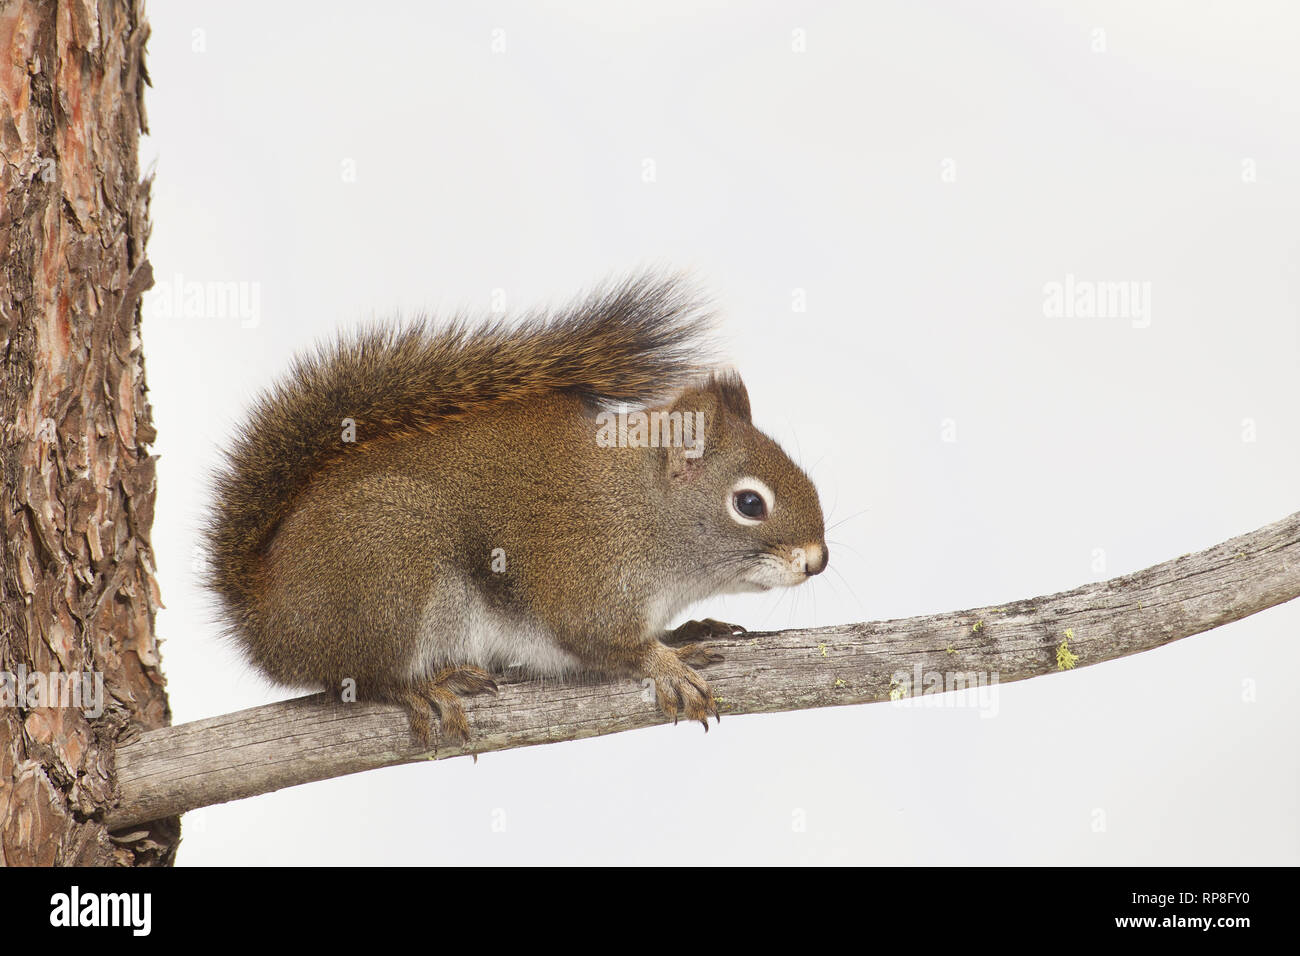 Red Squirrel, a.k.a. Pine Squirrel, on Pine tree branch with tree trunk and isolated white winter background Stock Photo